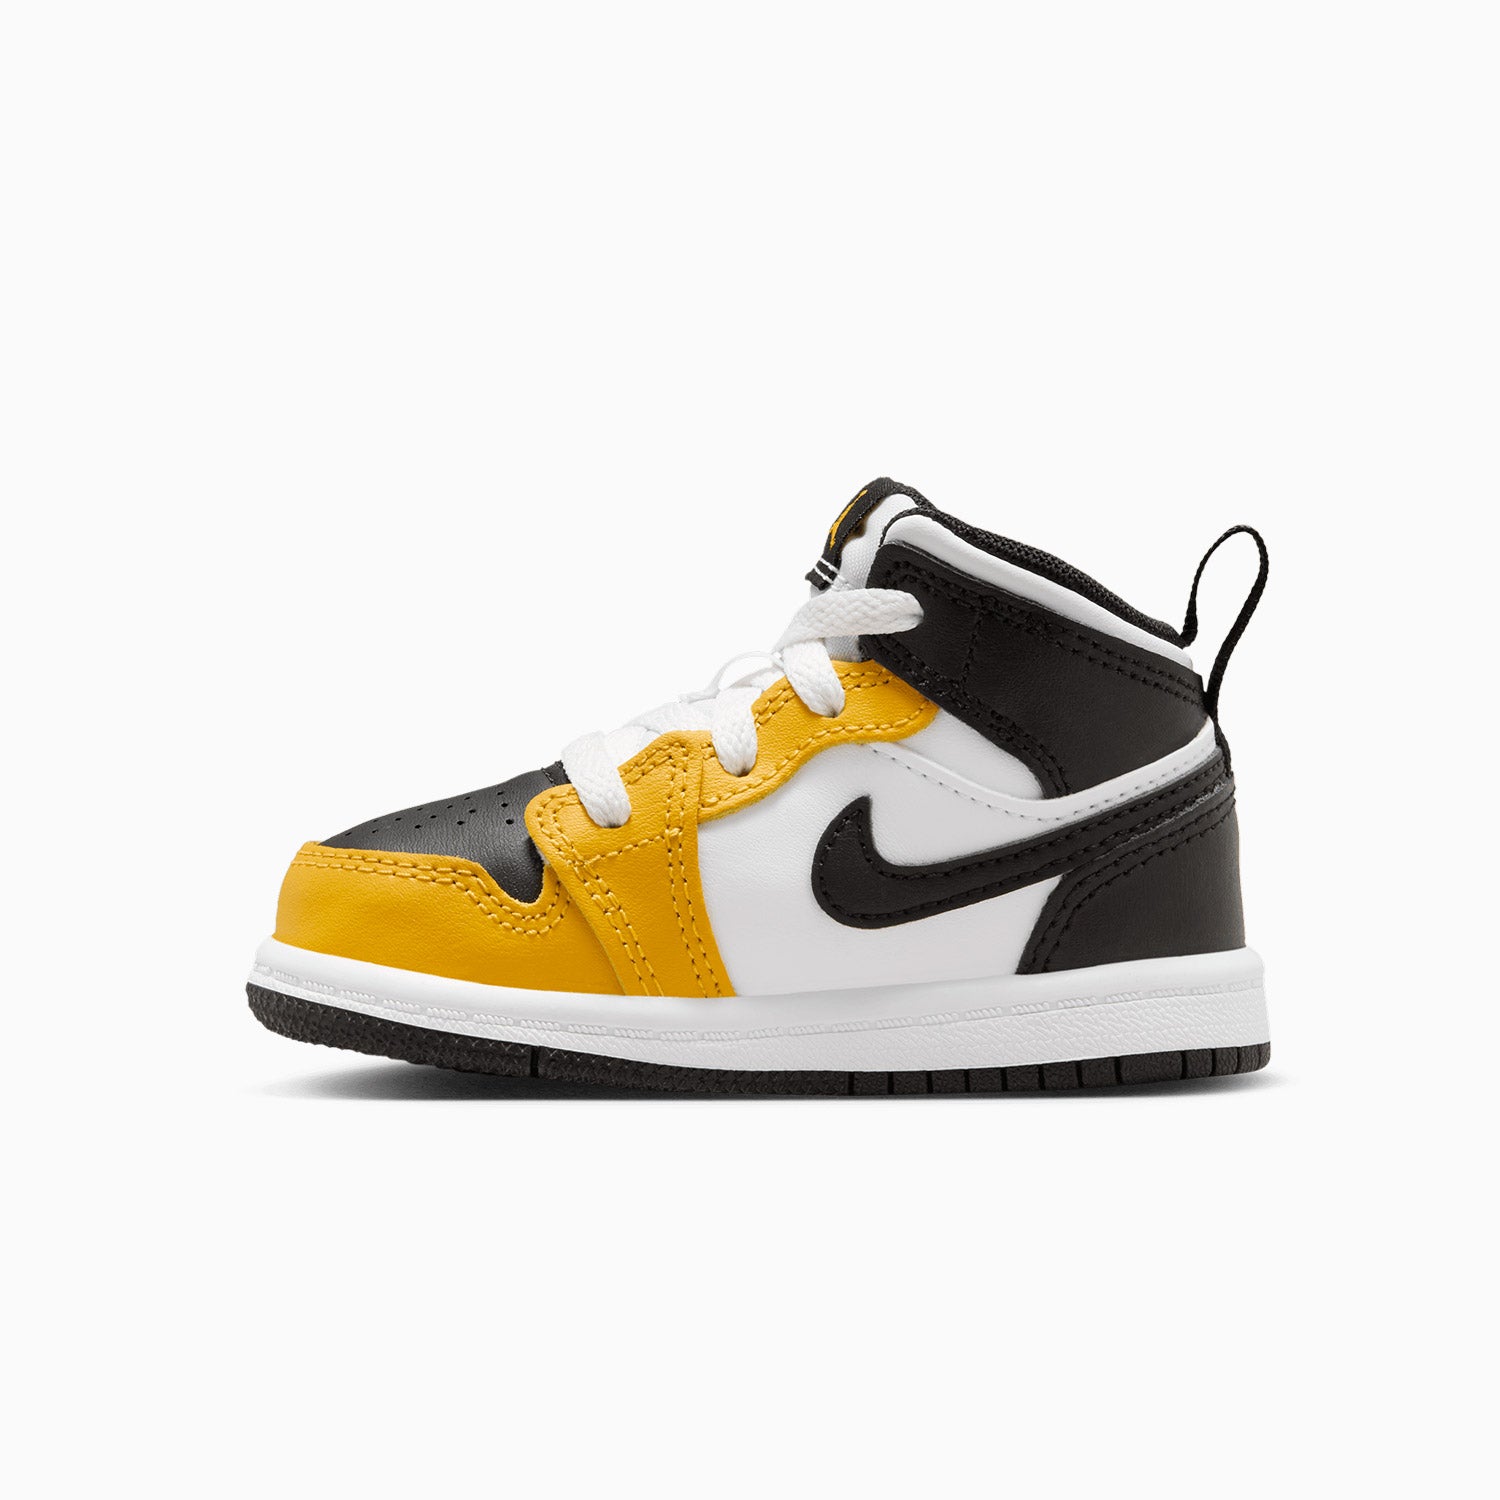 kids-air-jordan-1-mid-yellow-ochre-toddlers-shoes-dq8425-701